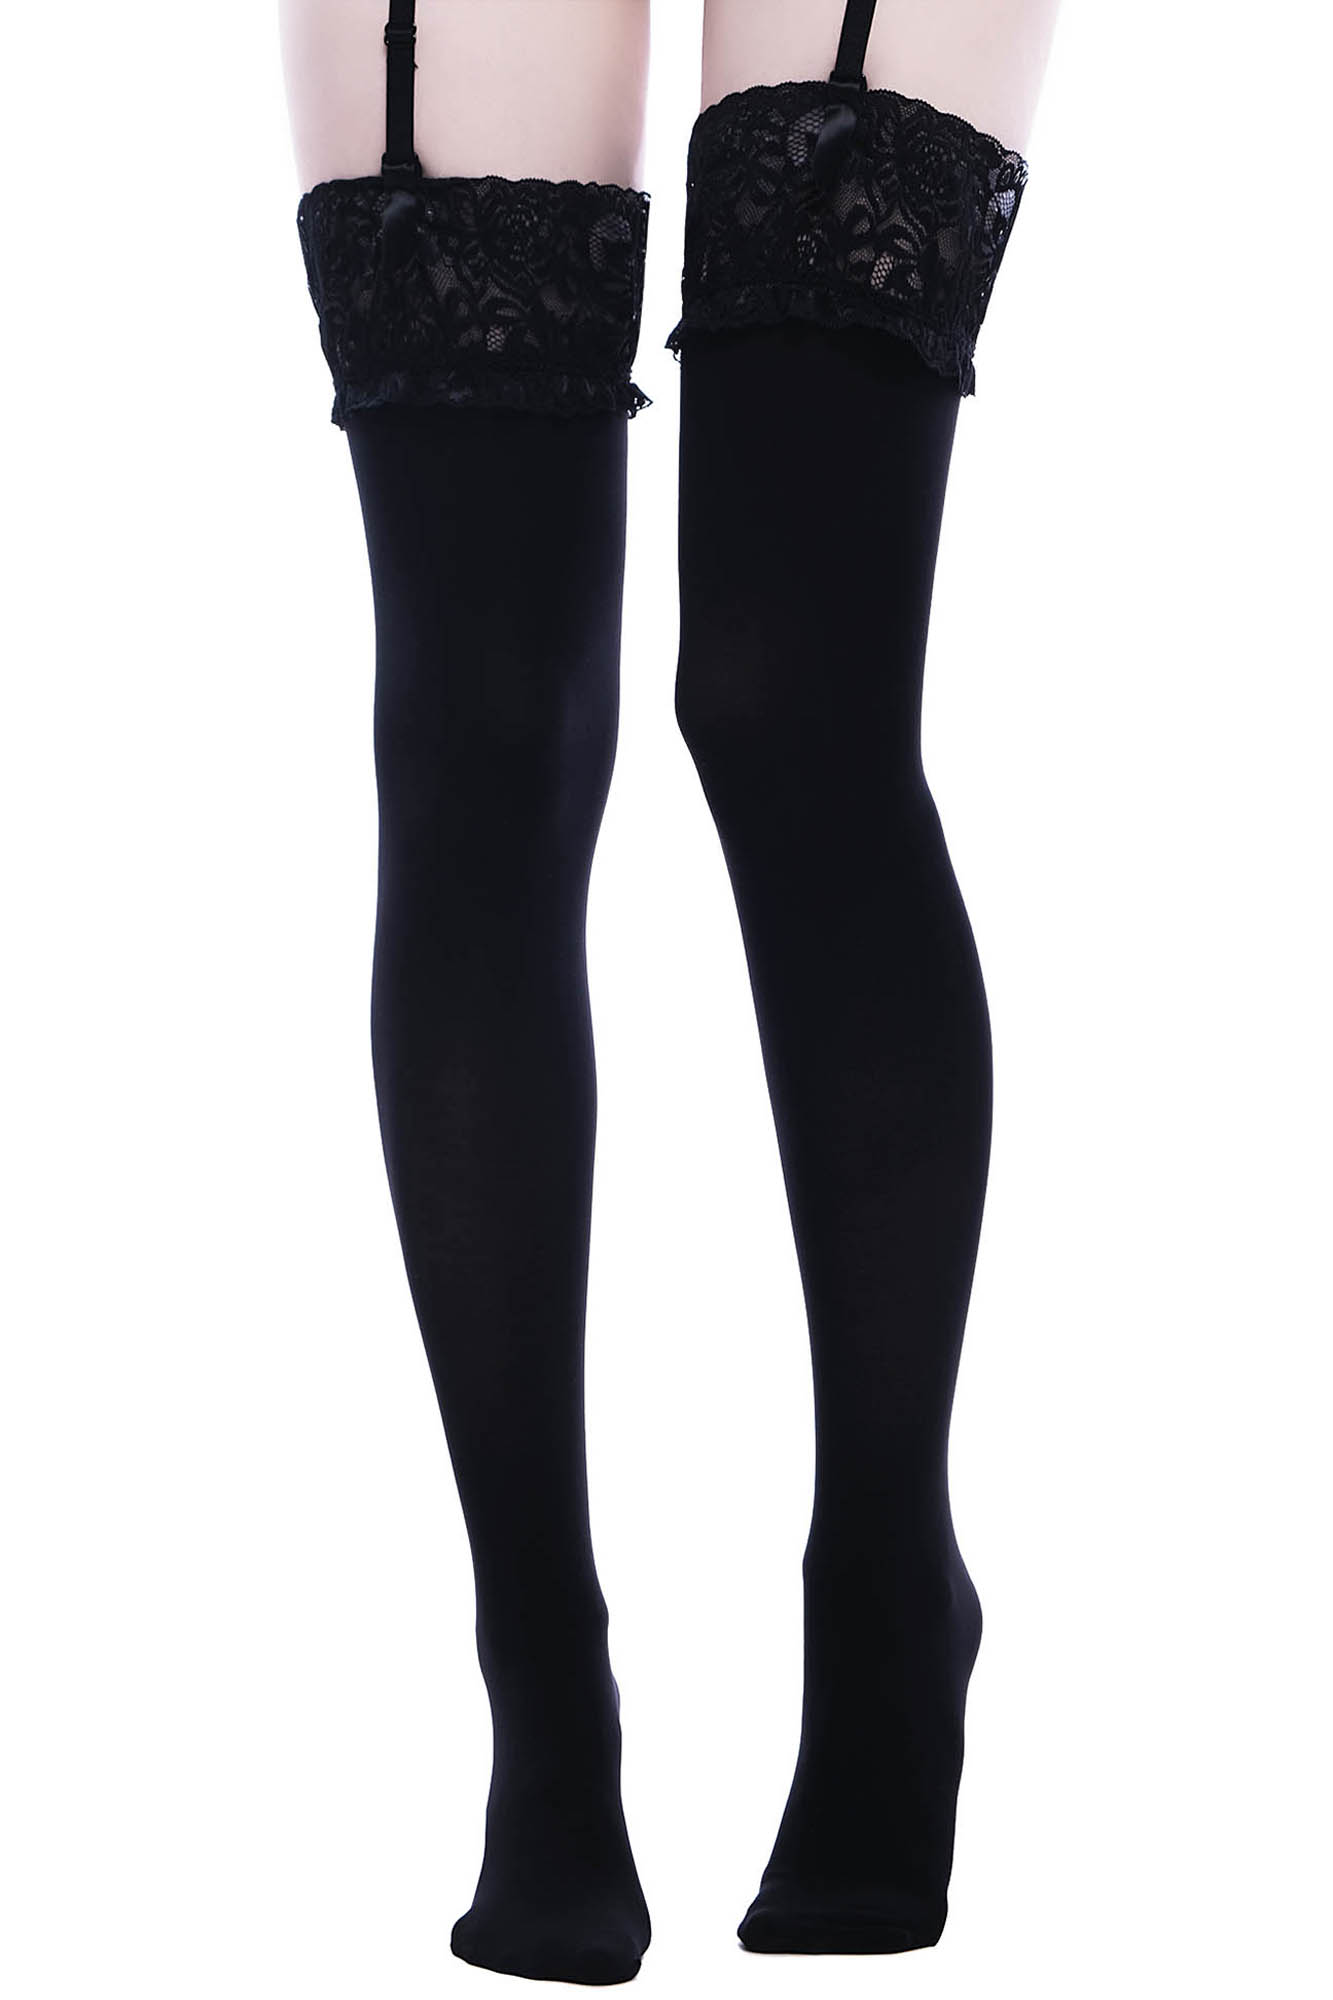 Thigh Highs for Women